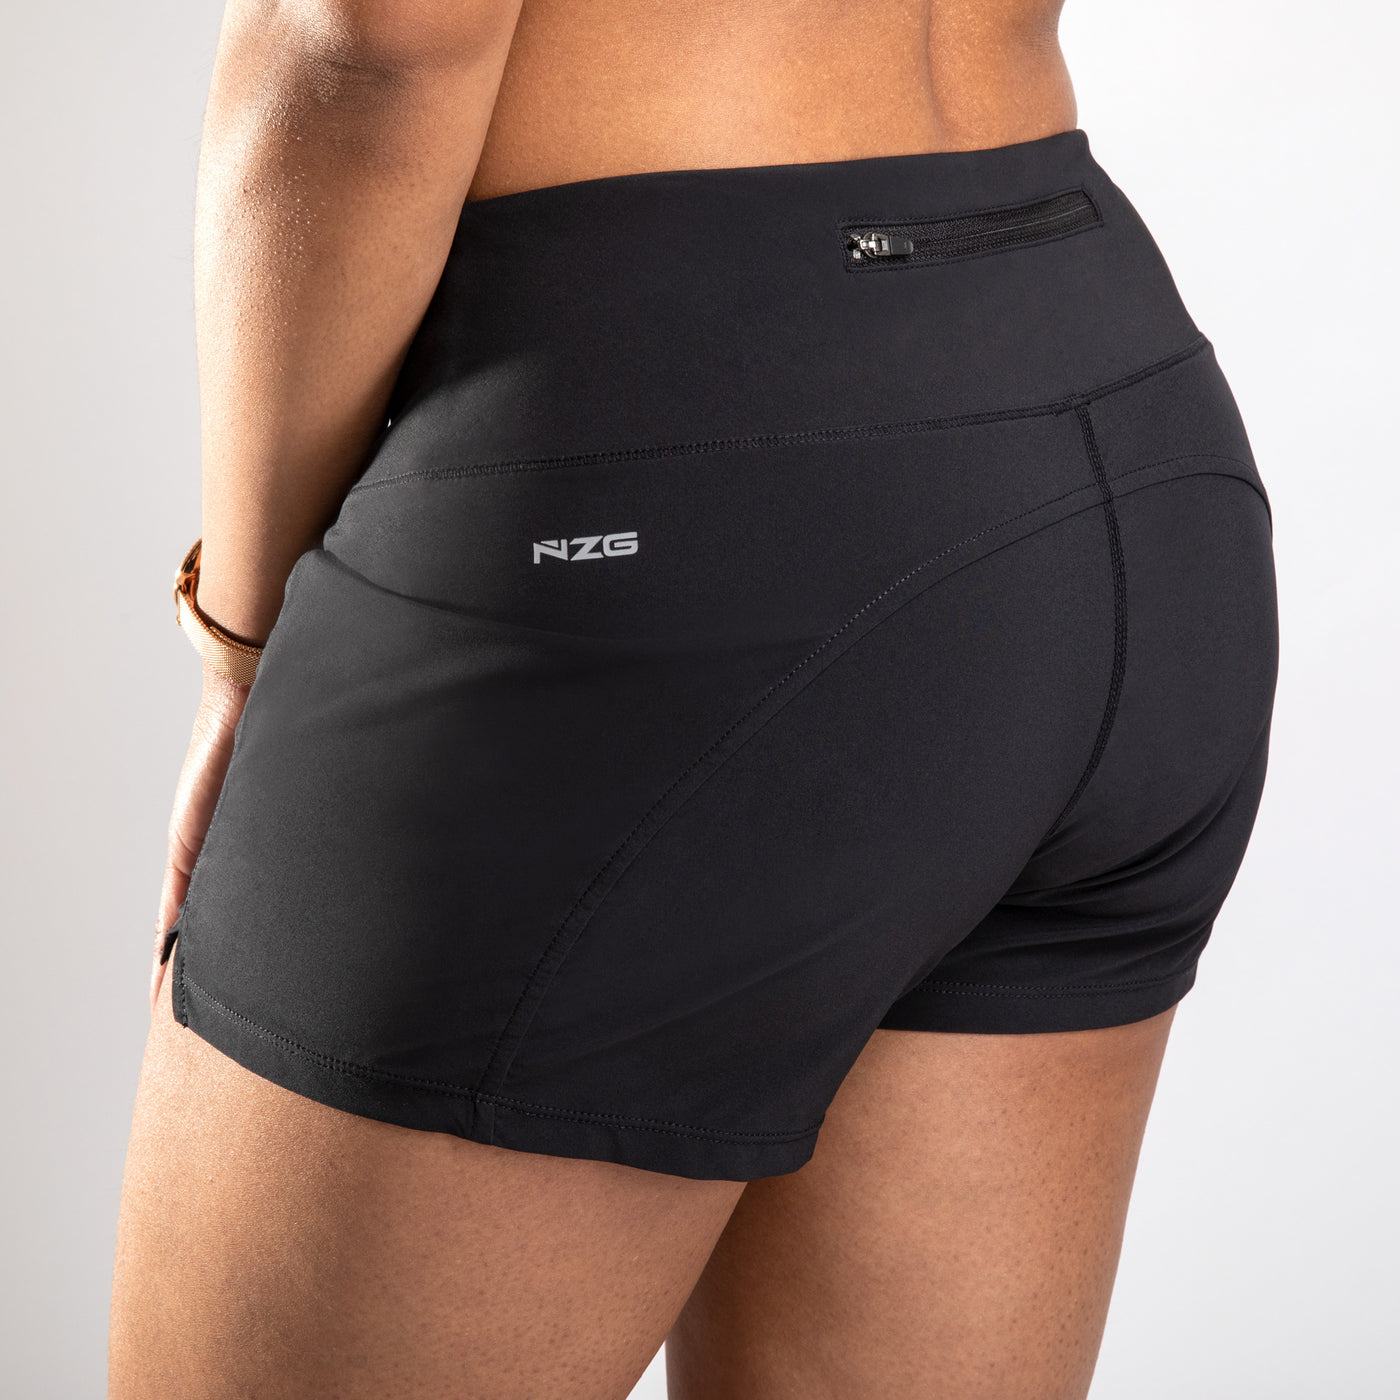 NonZero Gravity Women’s ZinTex Low-Rise Training Shorts made with Recycled Polyester & Spandex in Coal 